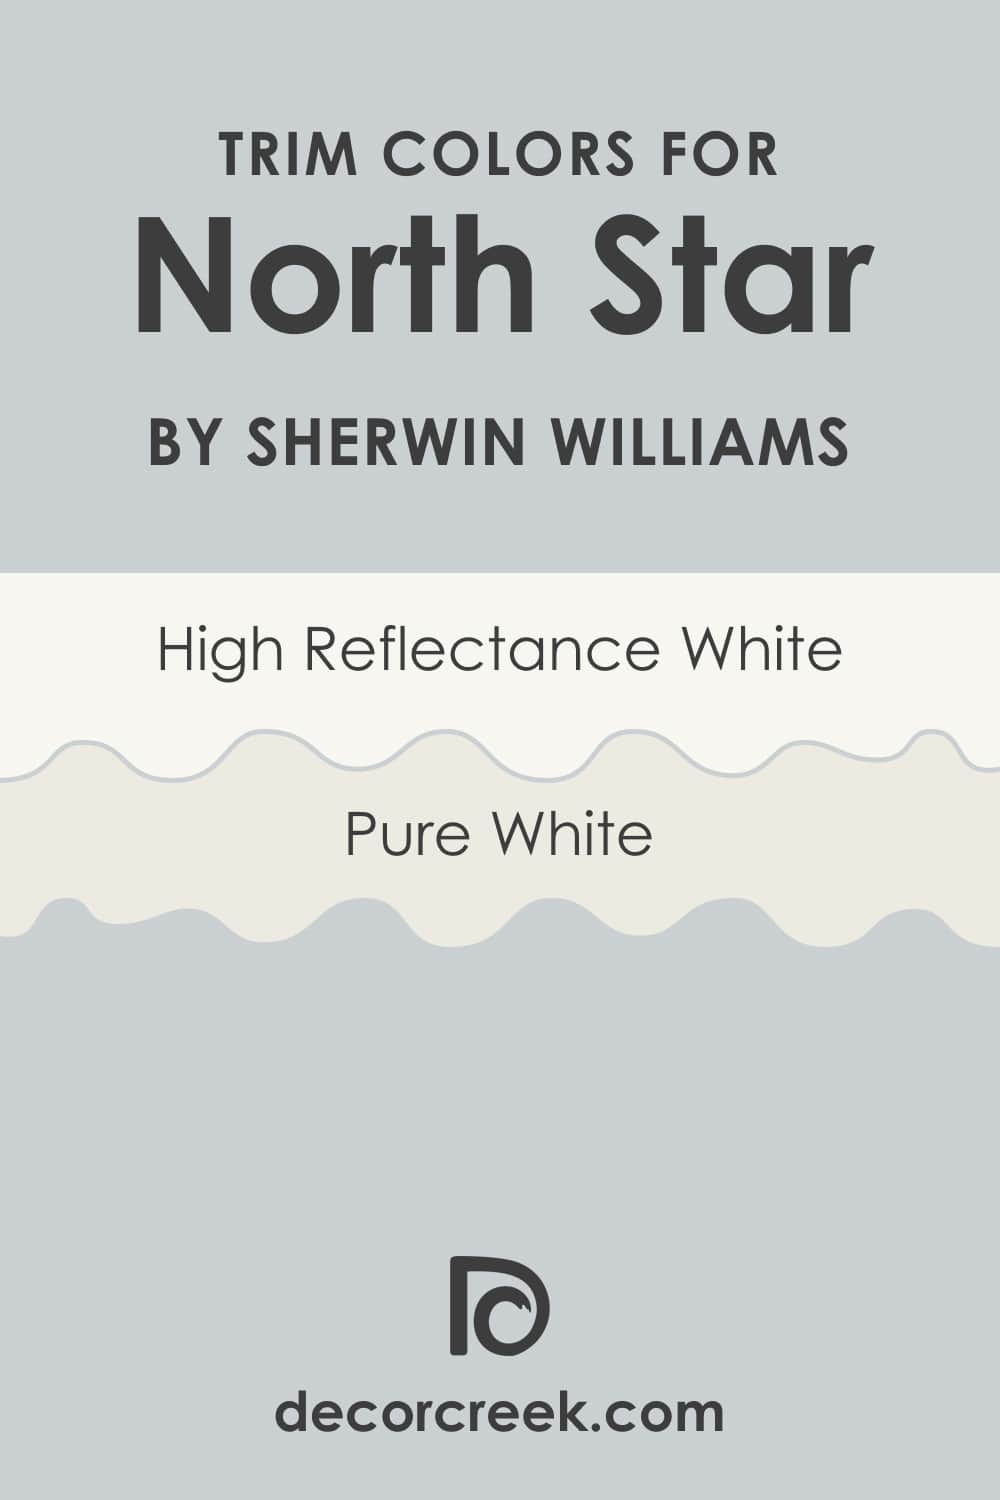 What Is the Best Trim Color for North Star SW-6246?